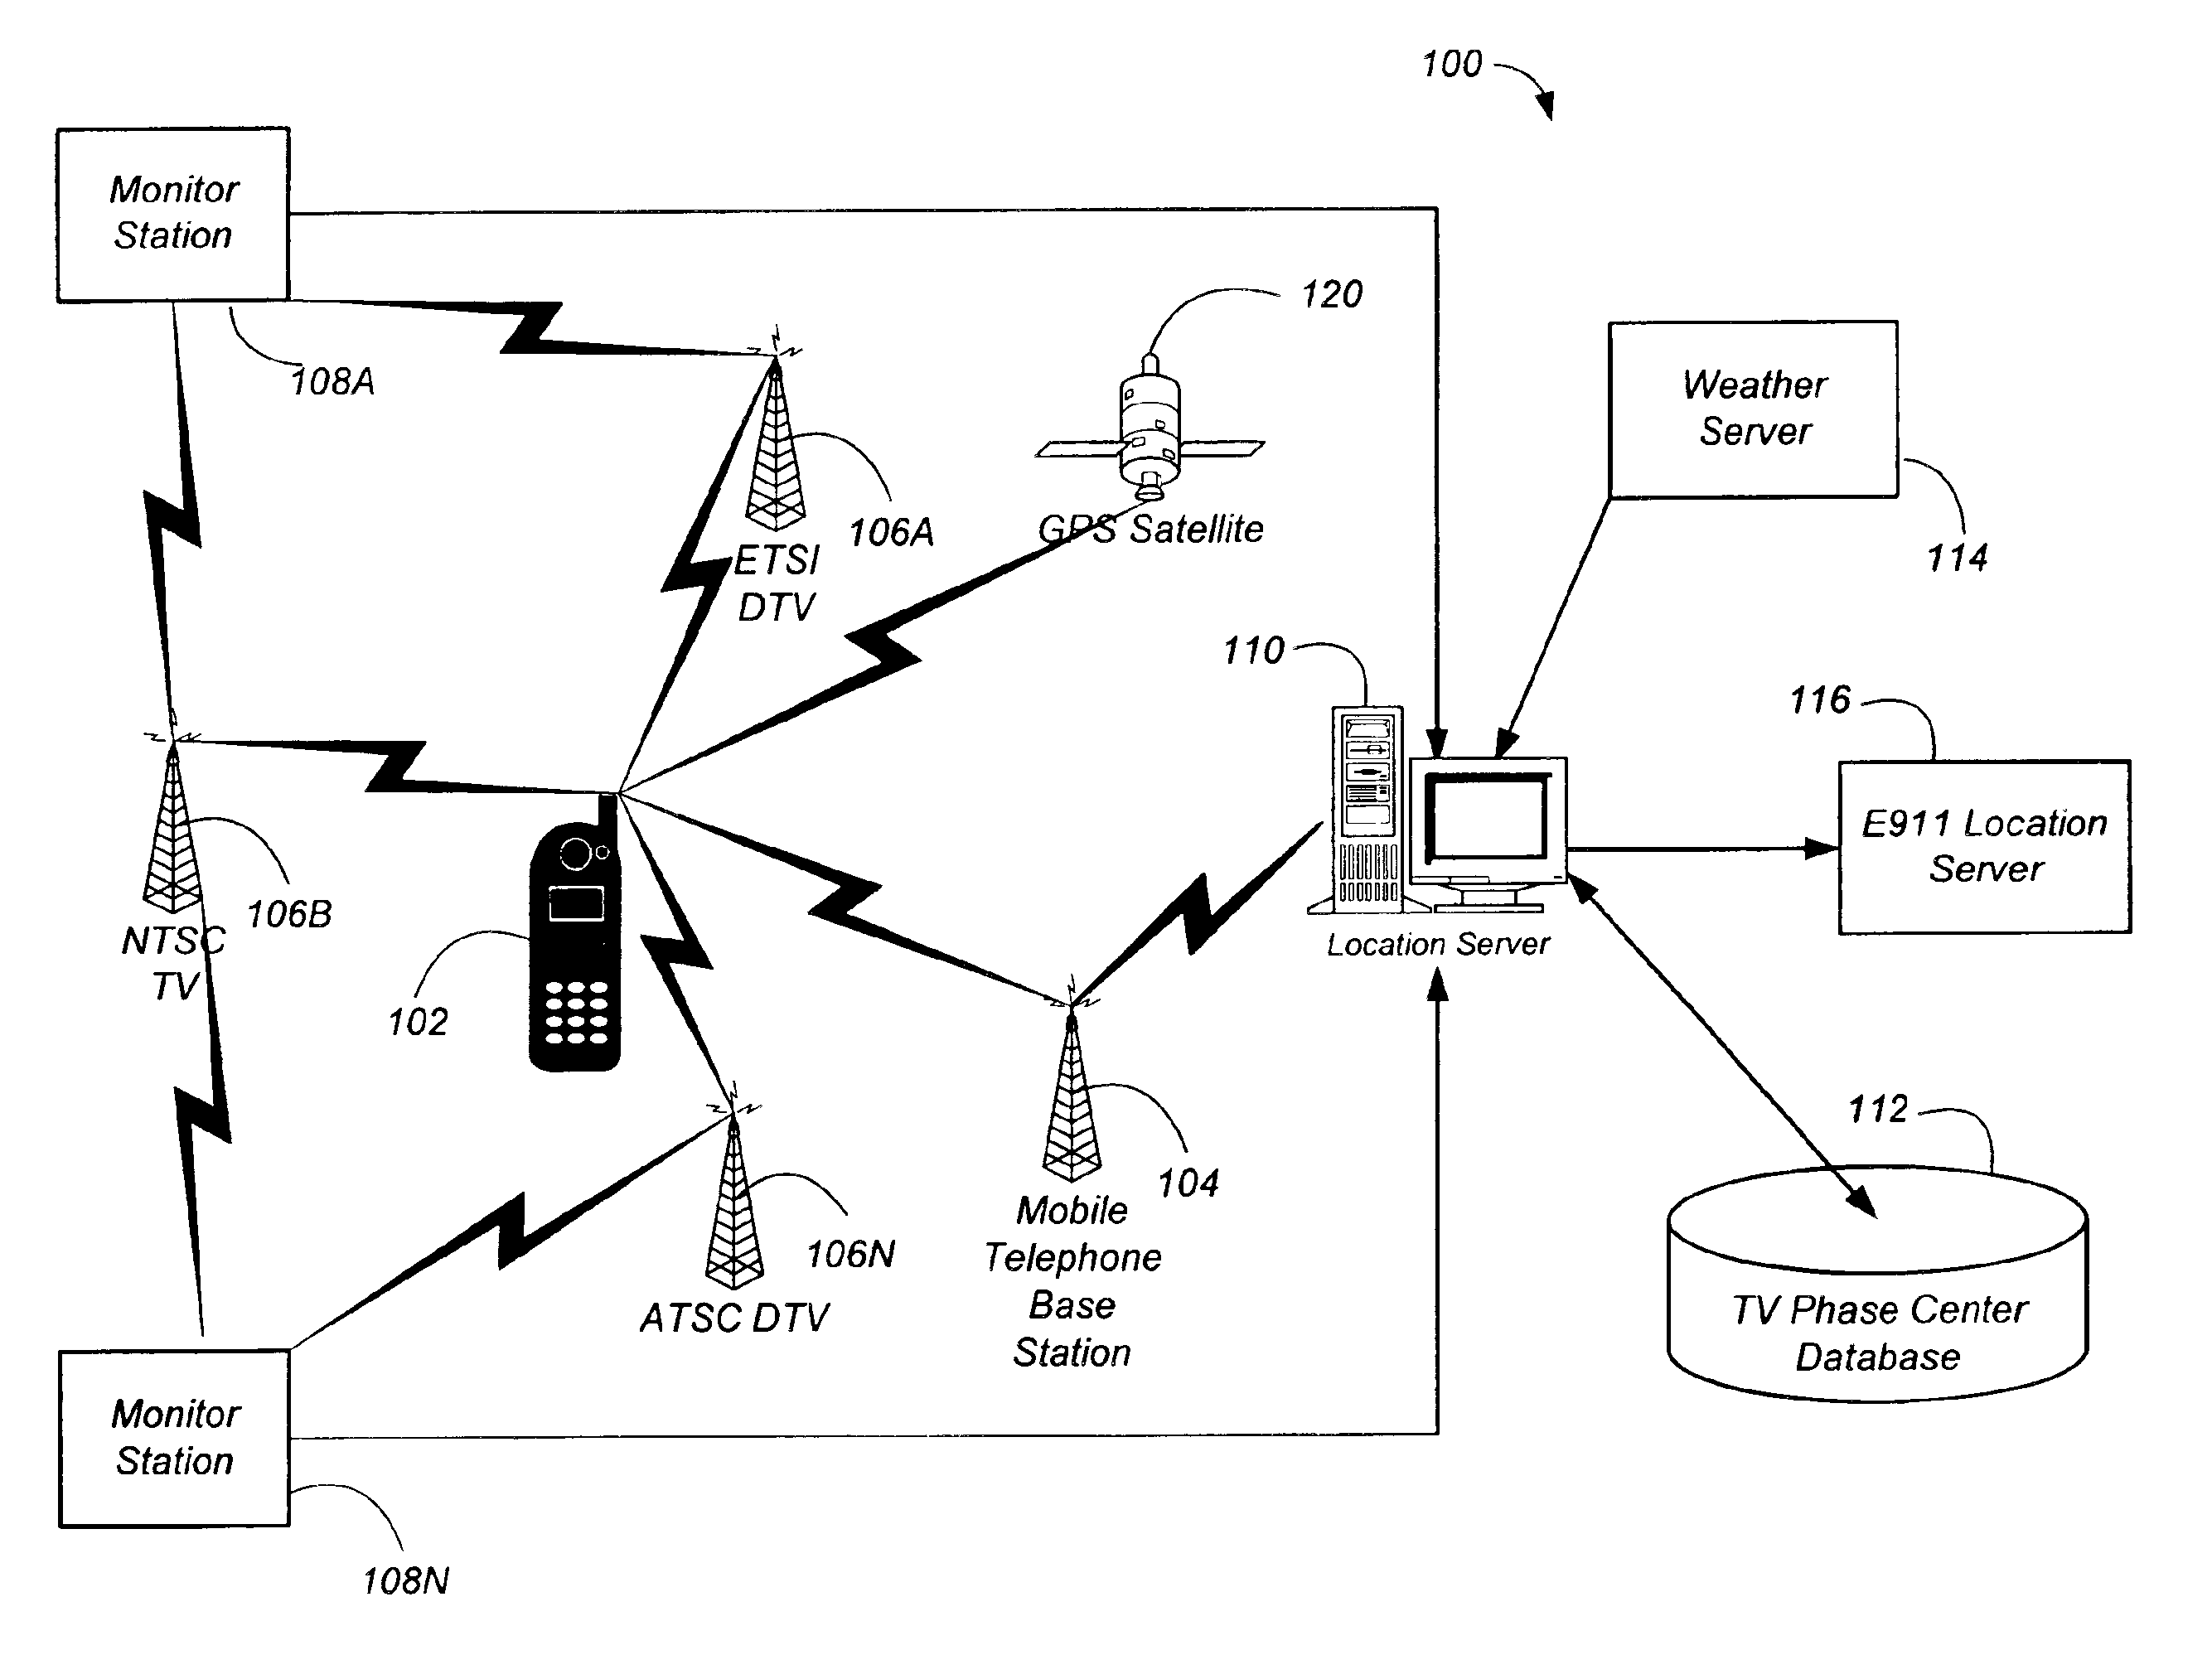 Position location using broadcast television signals and mobile telephone signals